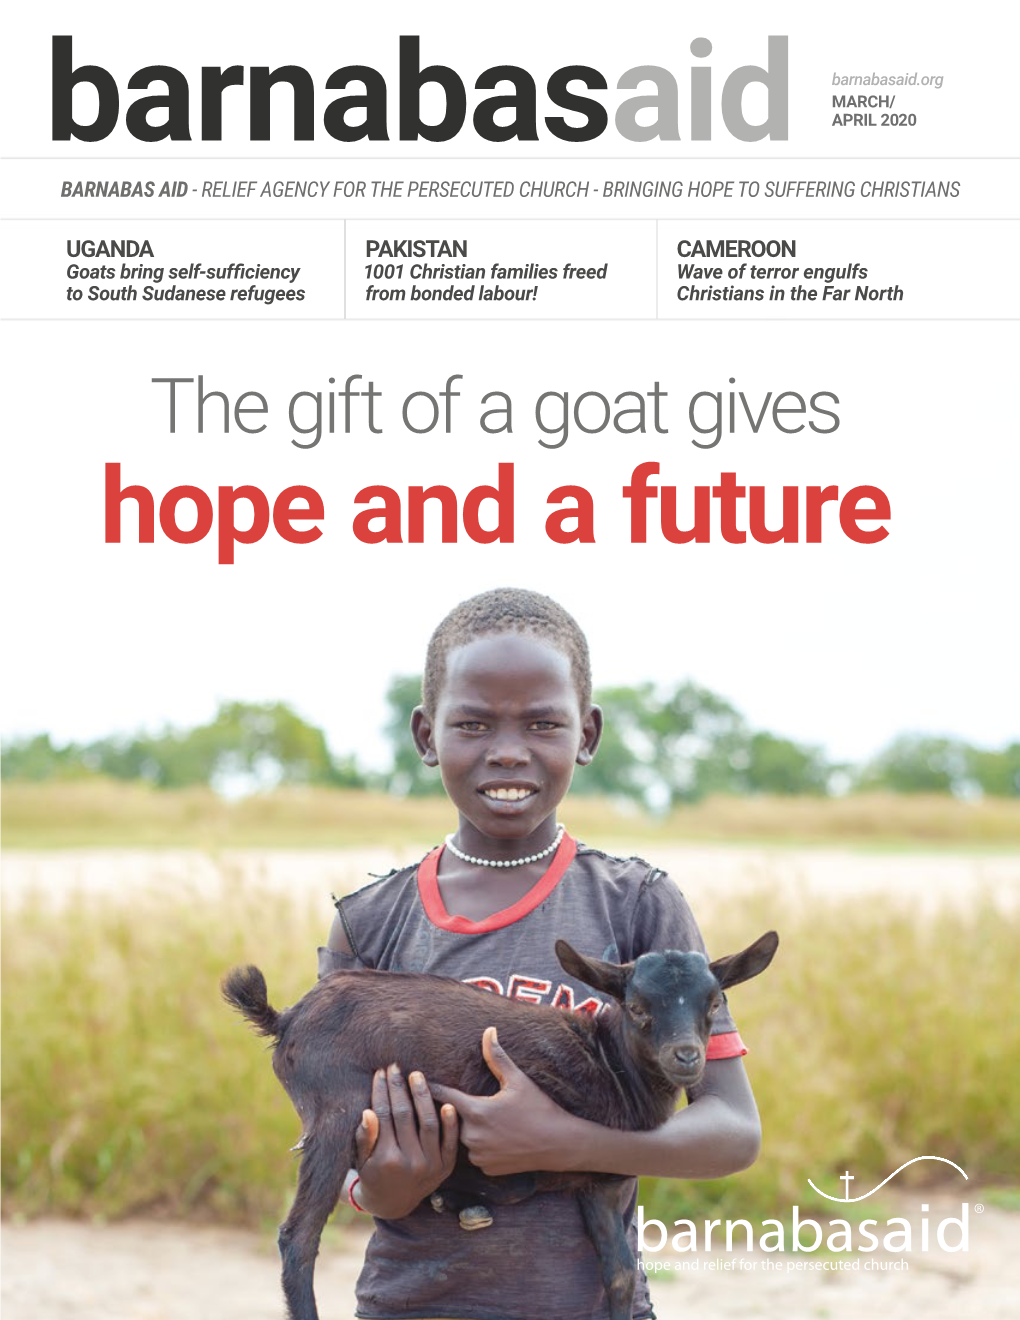 Hope and a Future What Helps Make Barnabas Aid Distinct from Other the Barnabas Aid Distinctive Christian Organizations That Deal with Persecution?